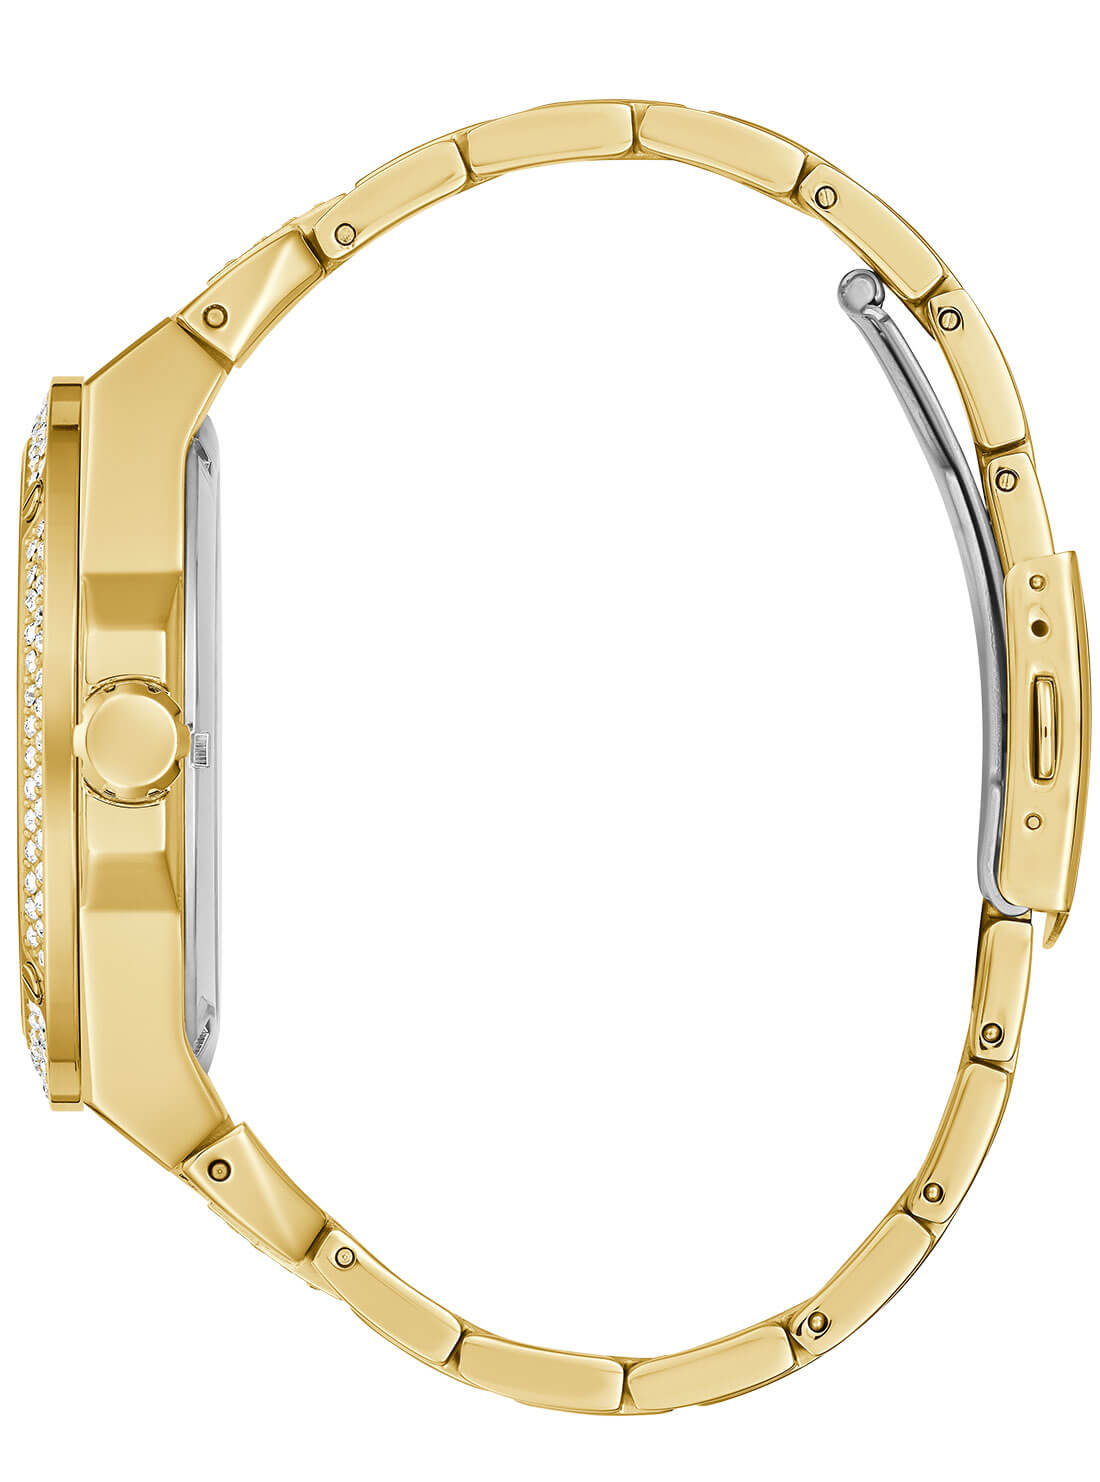 GUESS Mens Gold Big Reveal Watch GW0323G2 Side View